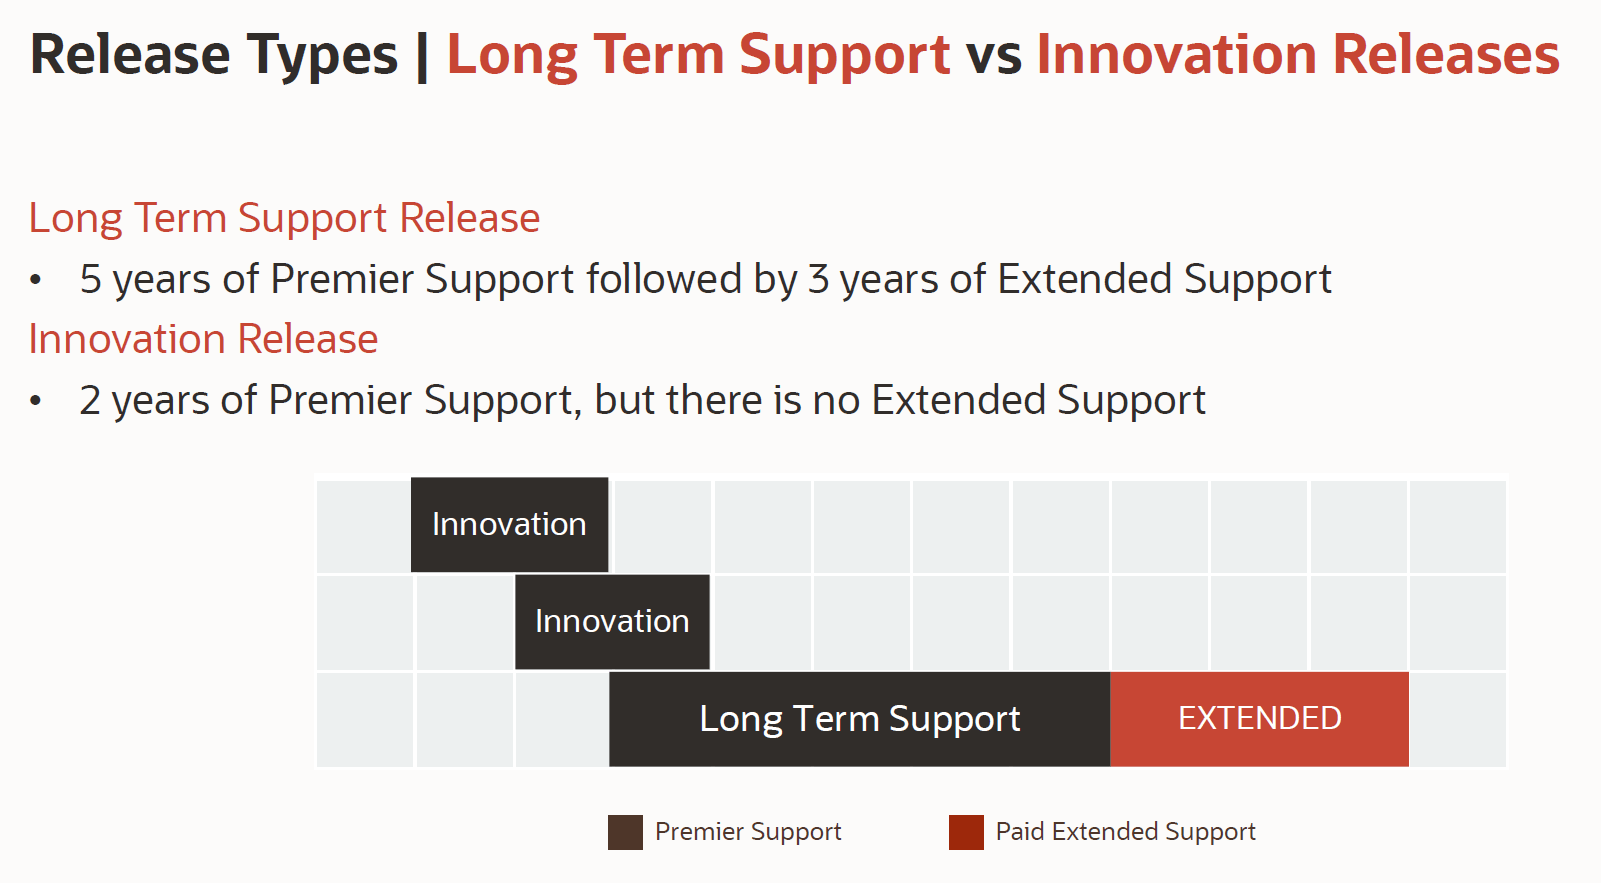 Different release types for Oracle Database - innovation vs long term support